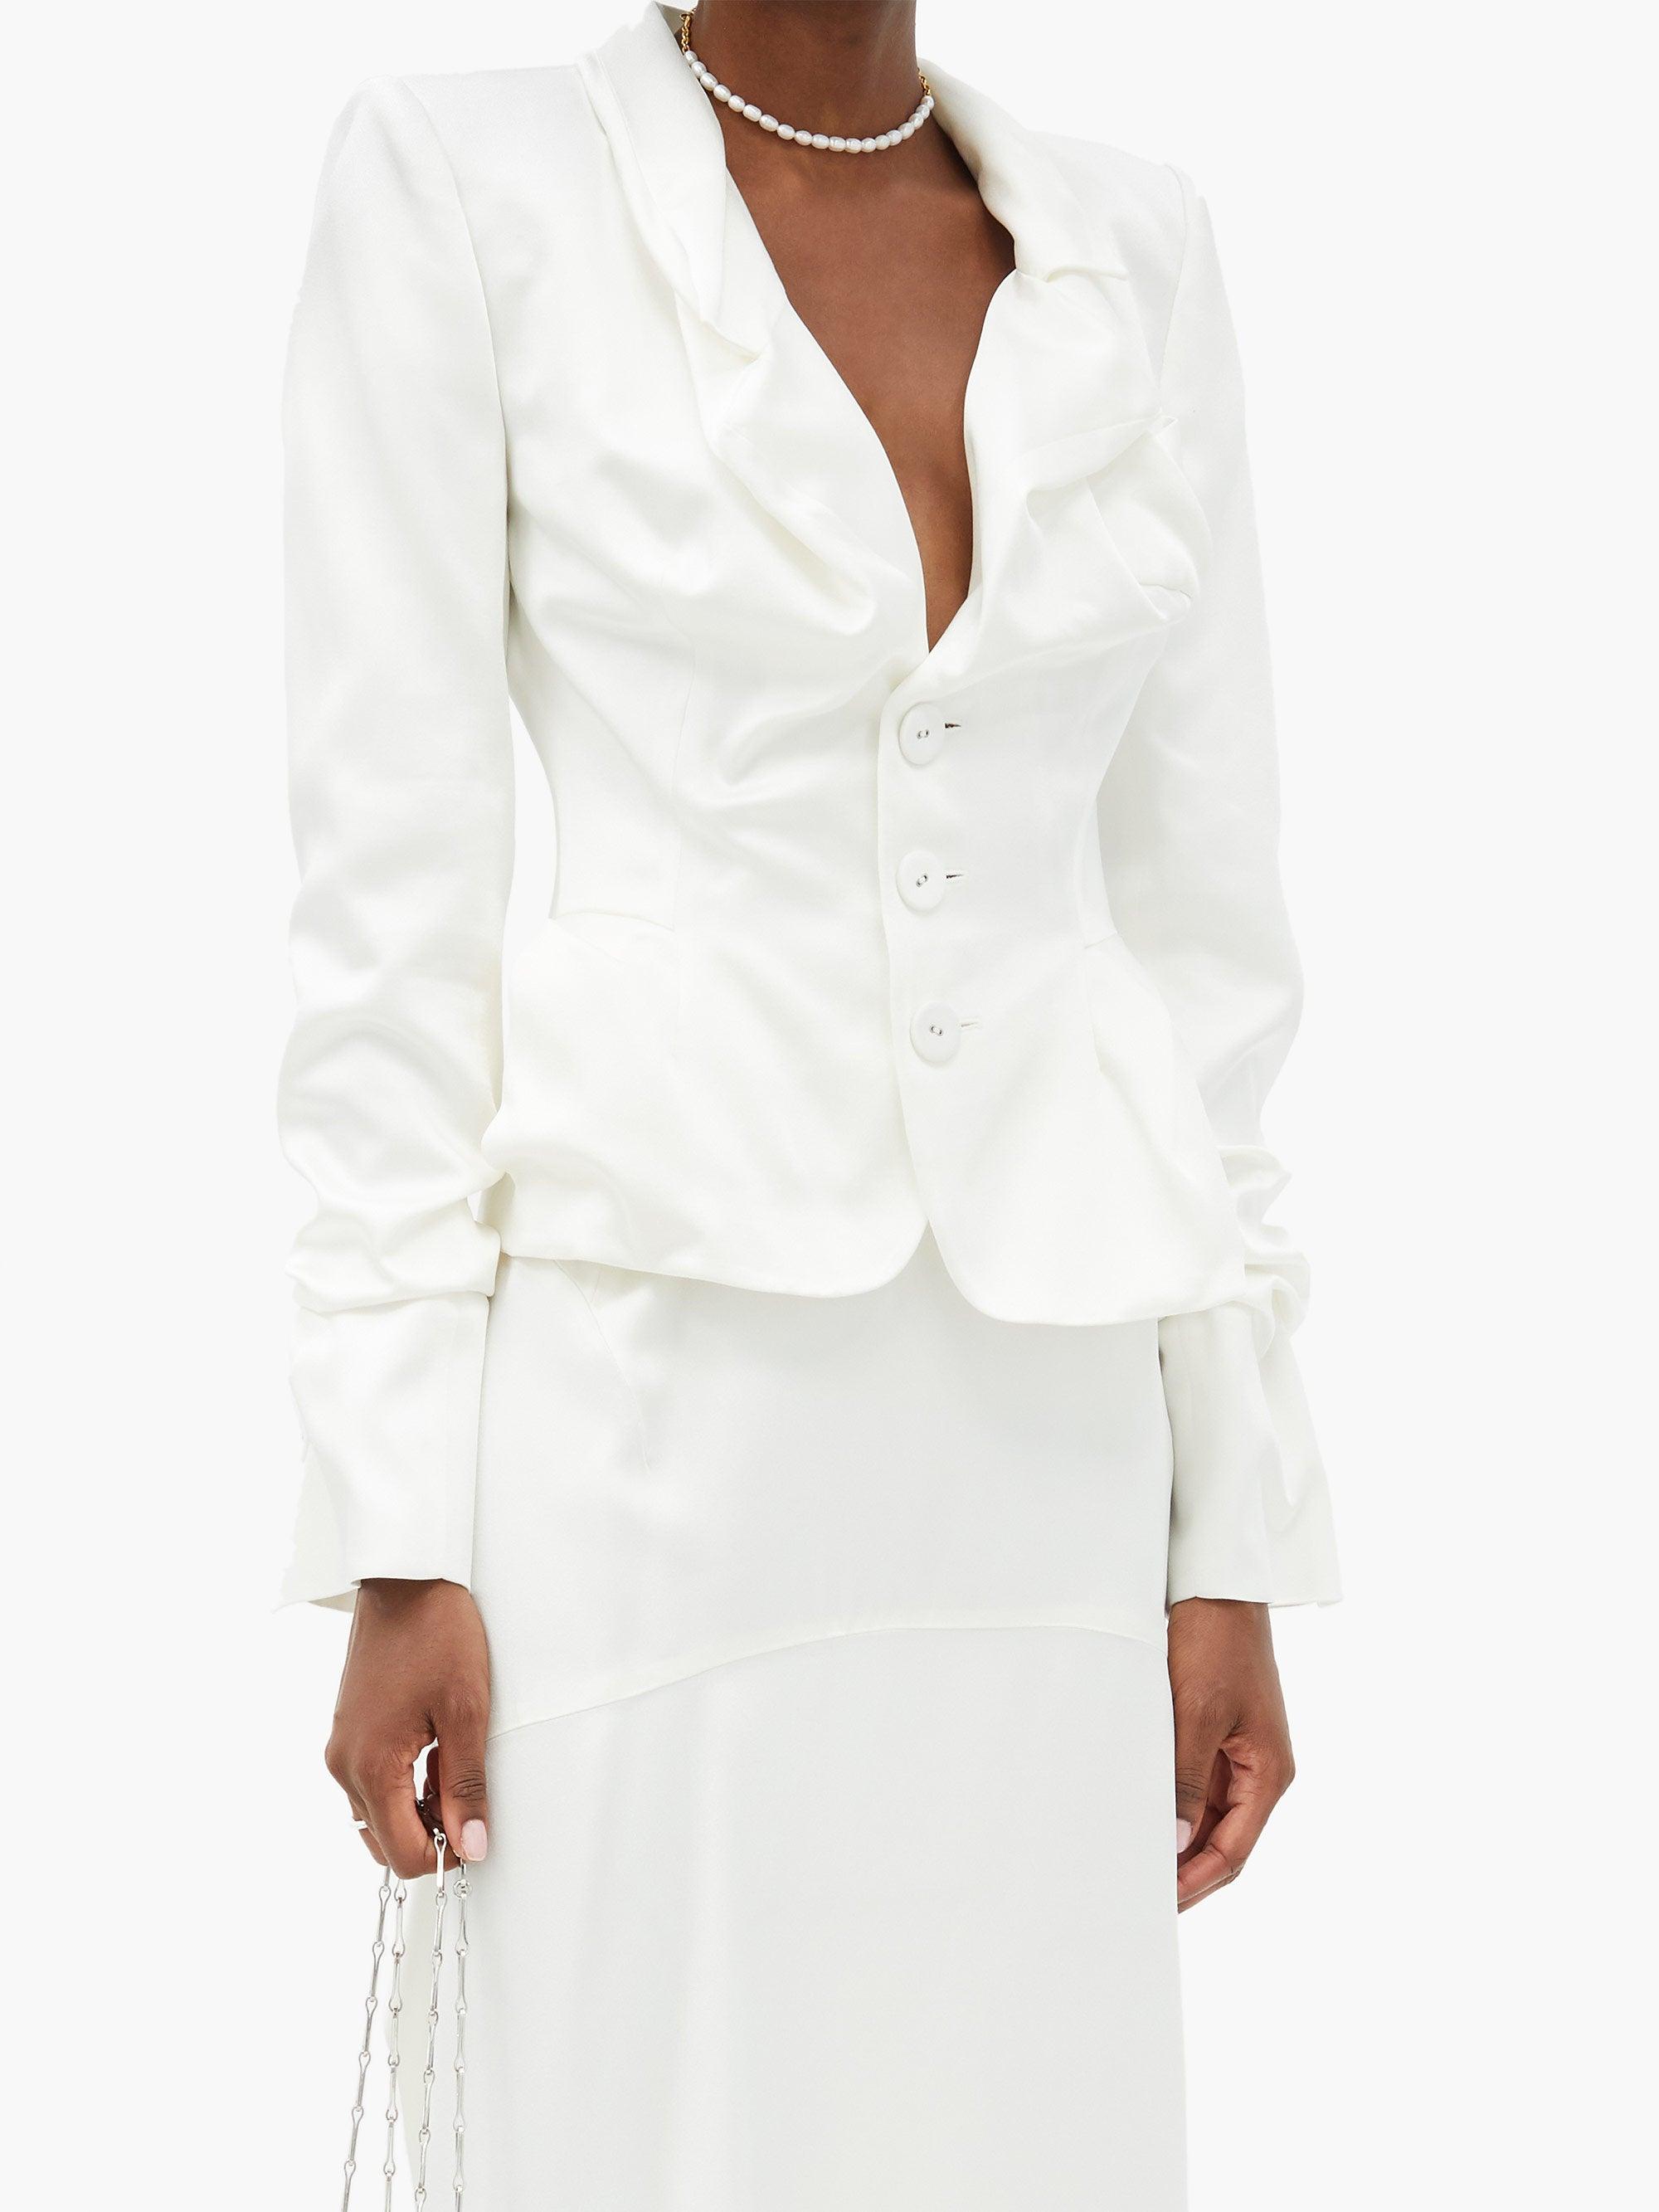 Vivienne Westwood Draped Single-breasted Satin Jacket in White | Lyst